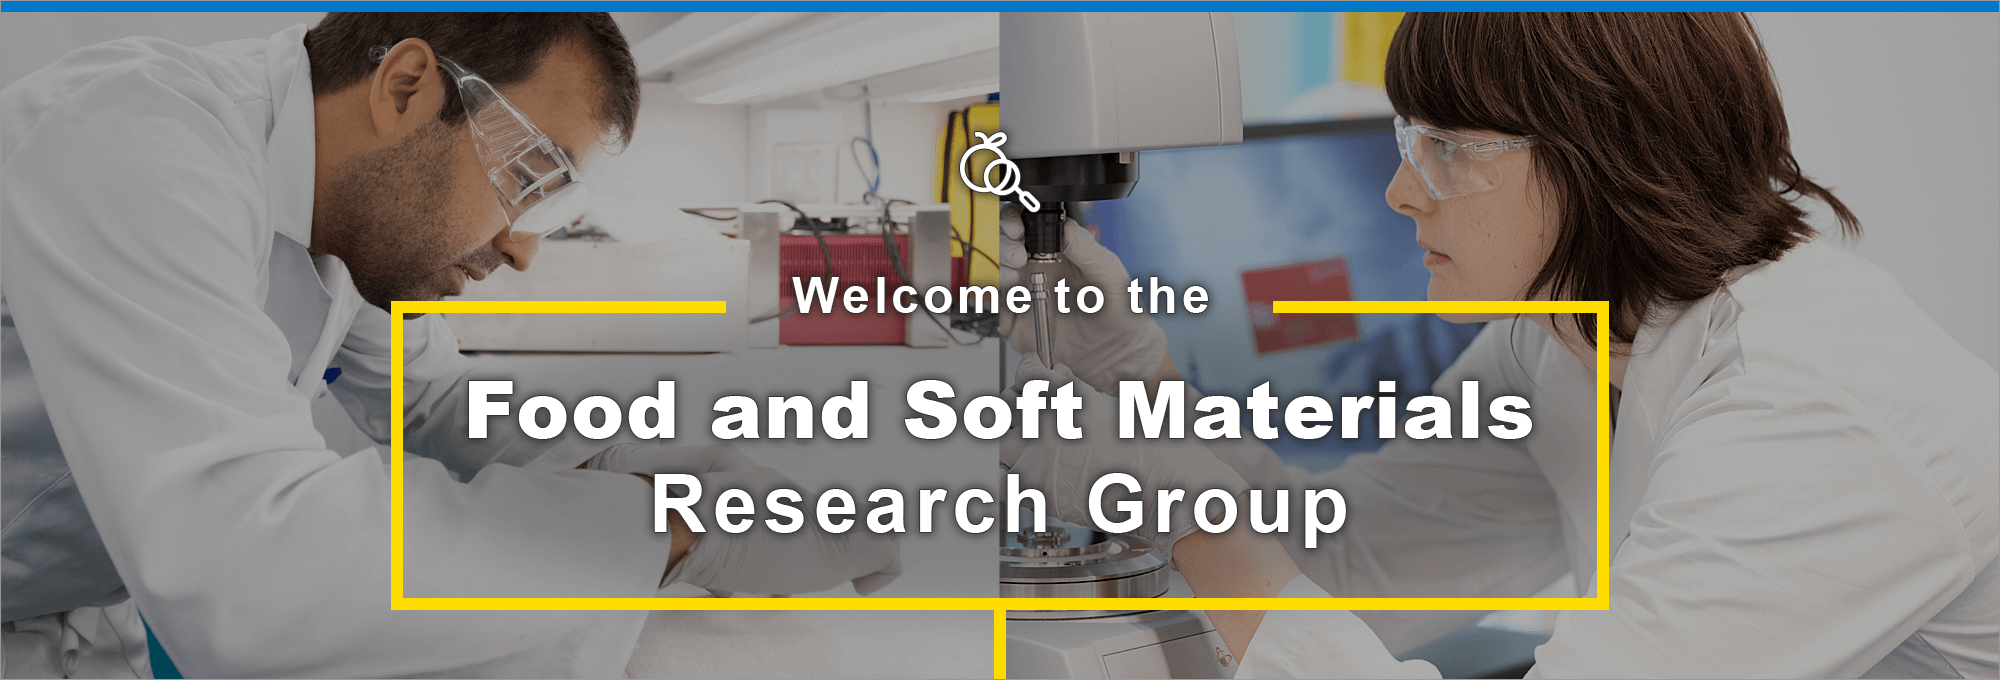 Welcome to the Food and Soft Materials Reseach Group.